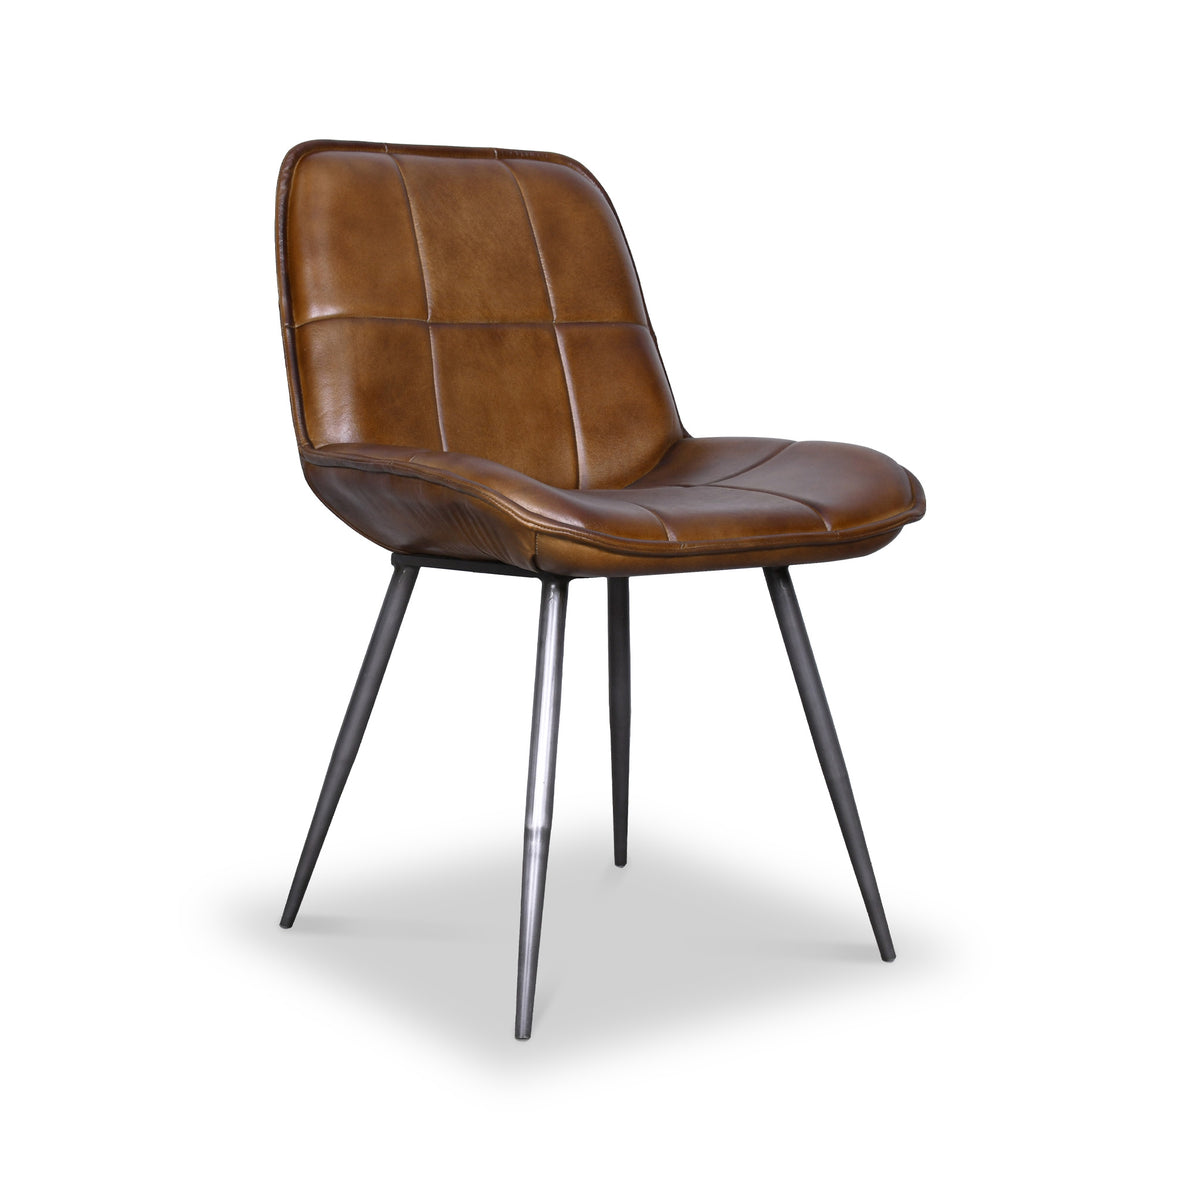 Danica Brown Buffalo Leather Dining Chair from Roseland Furniture